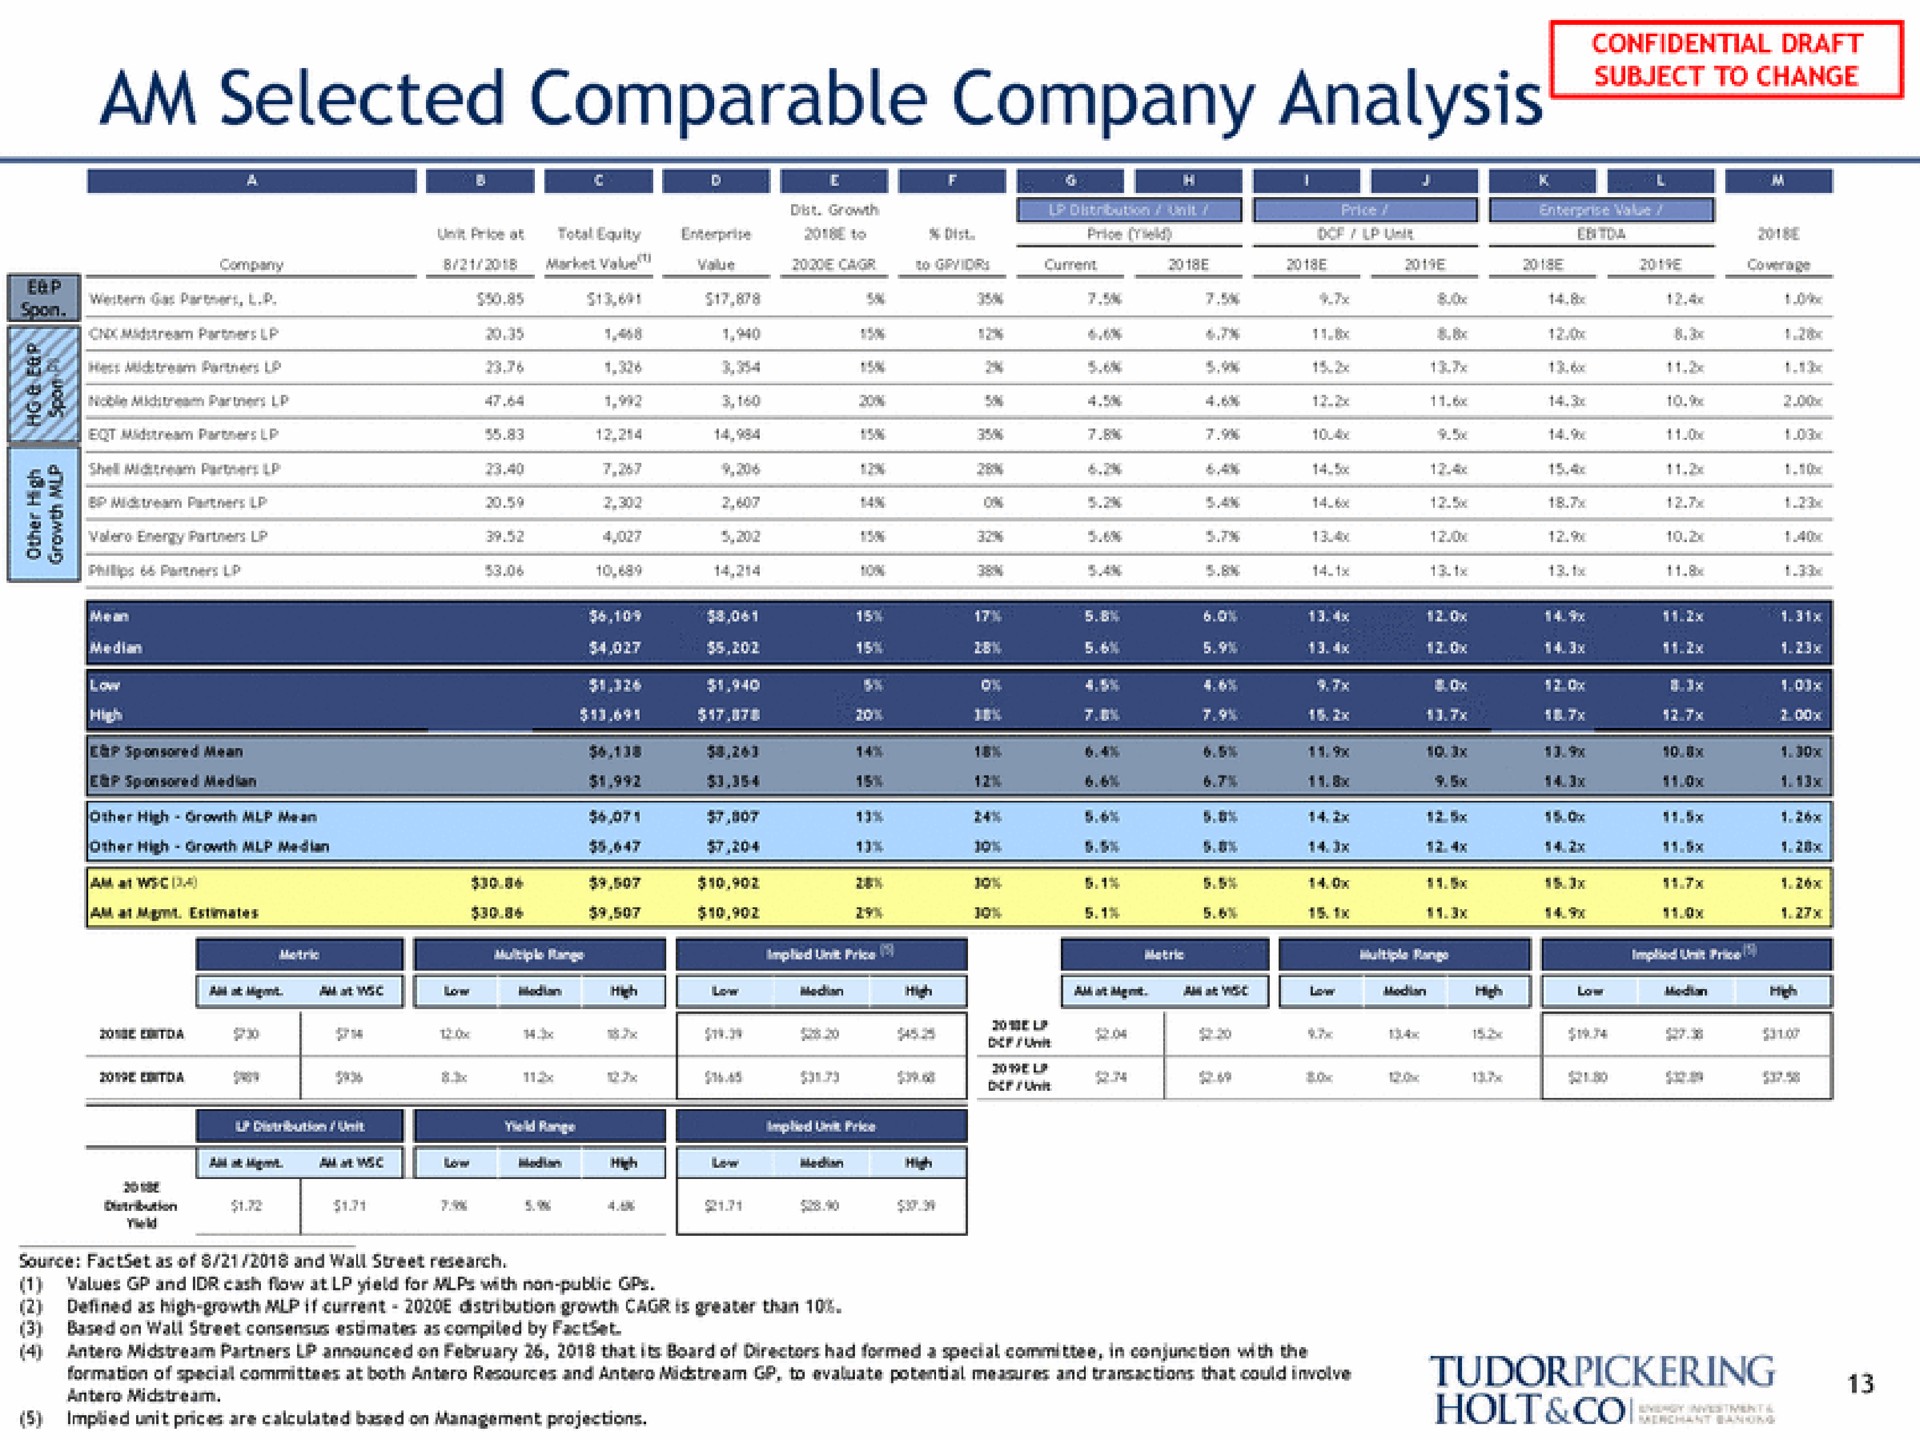 am selected comparable company analysis a i i a a is a | Tudor, Pickering, Holt & Co